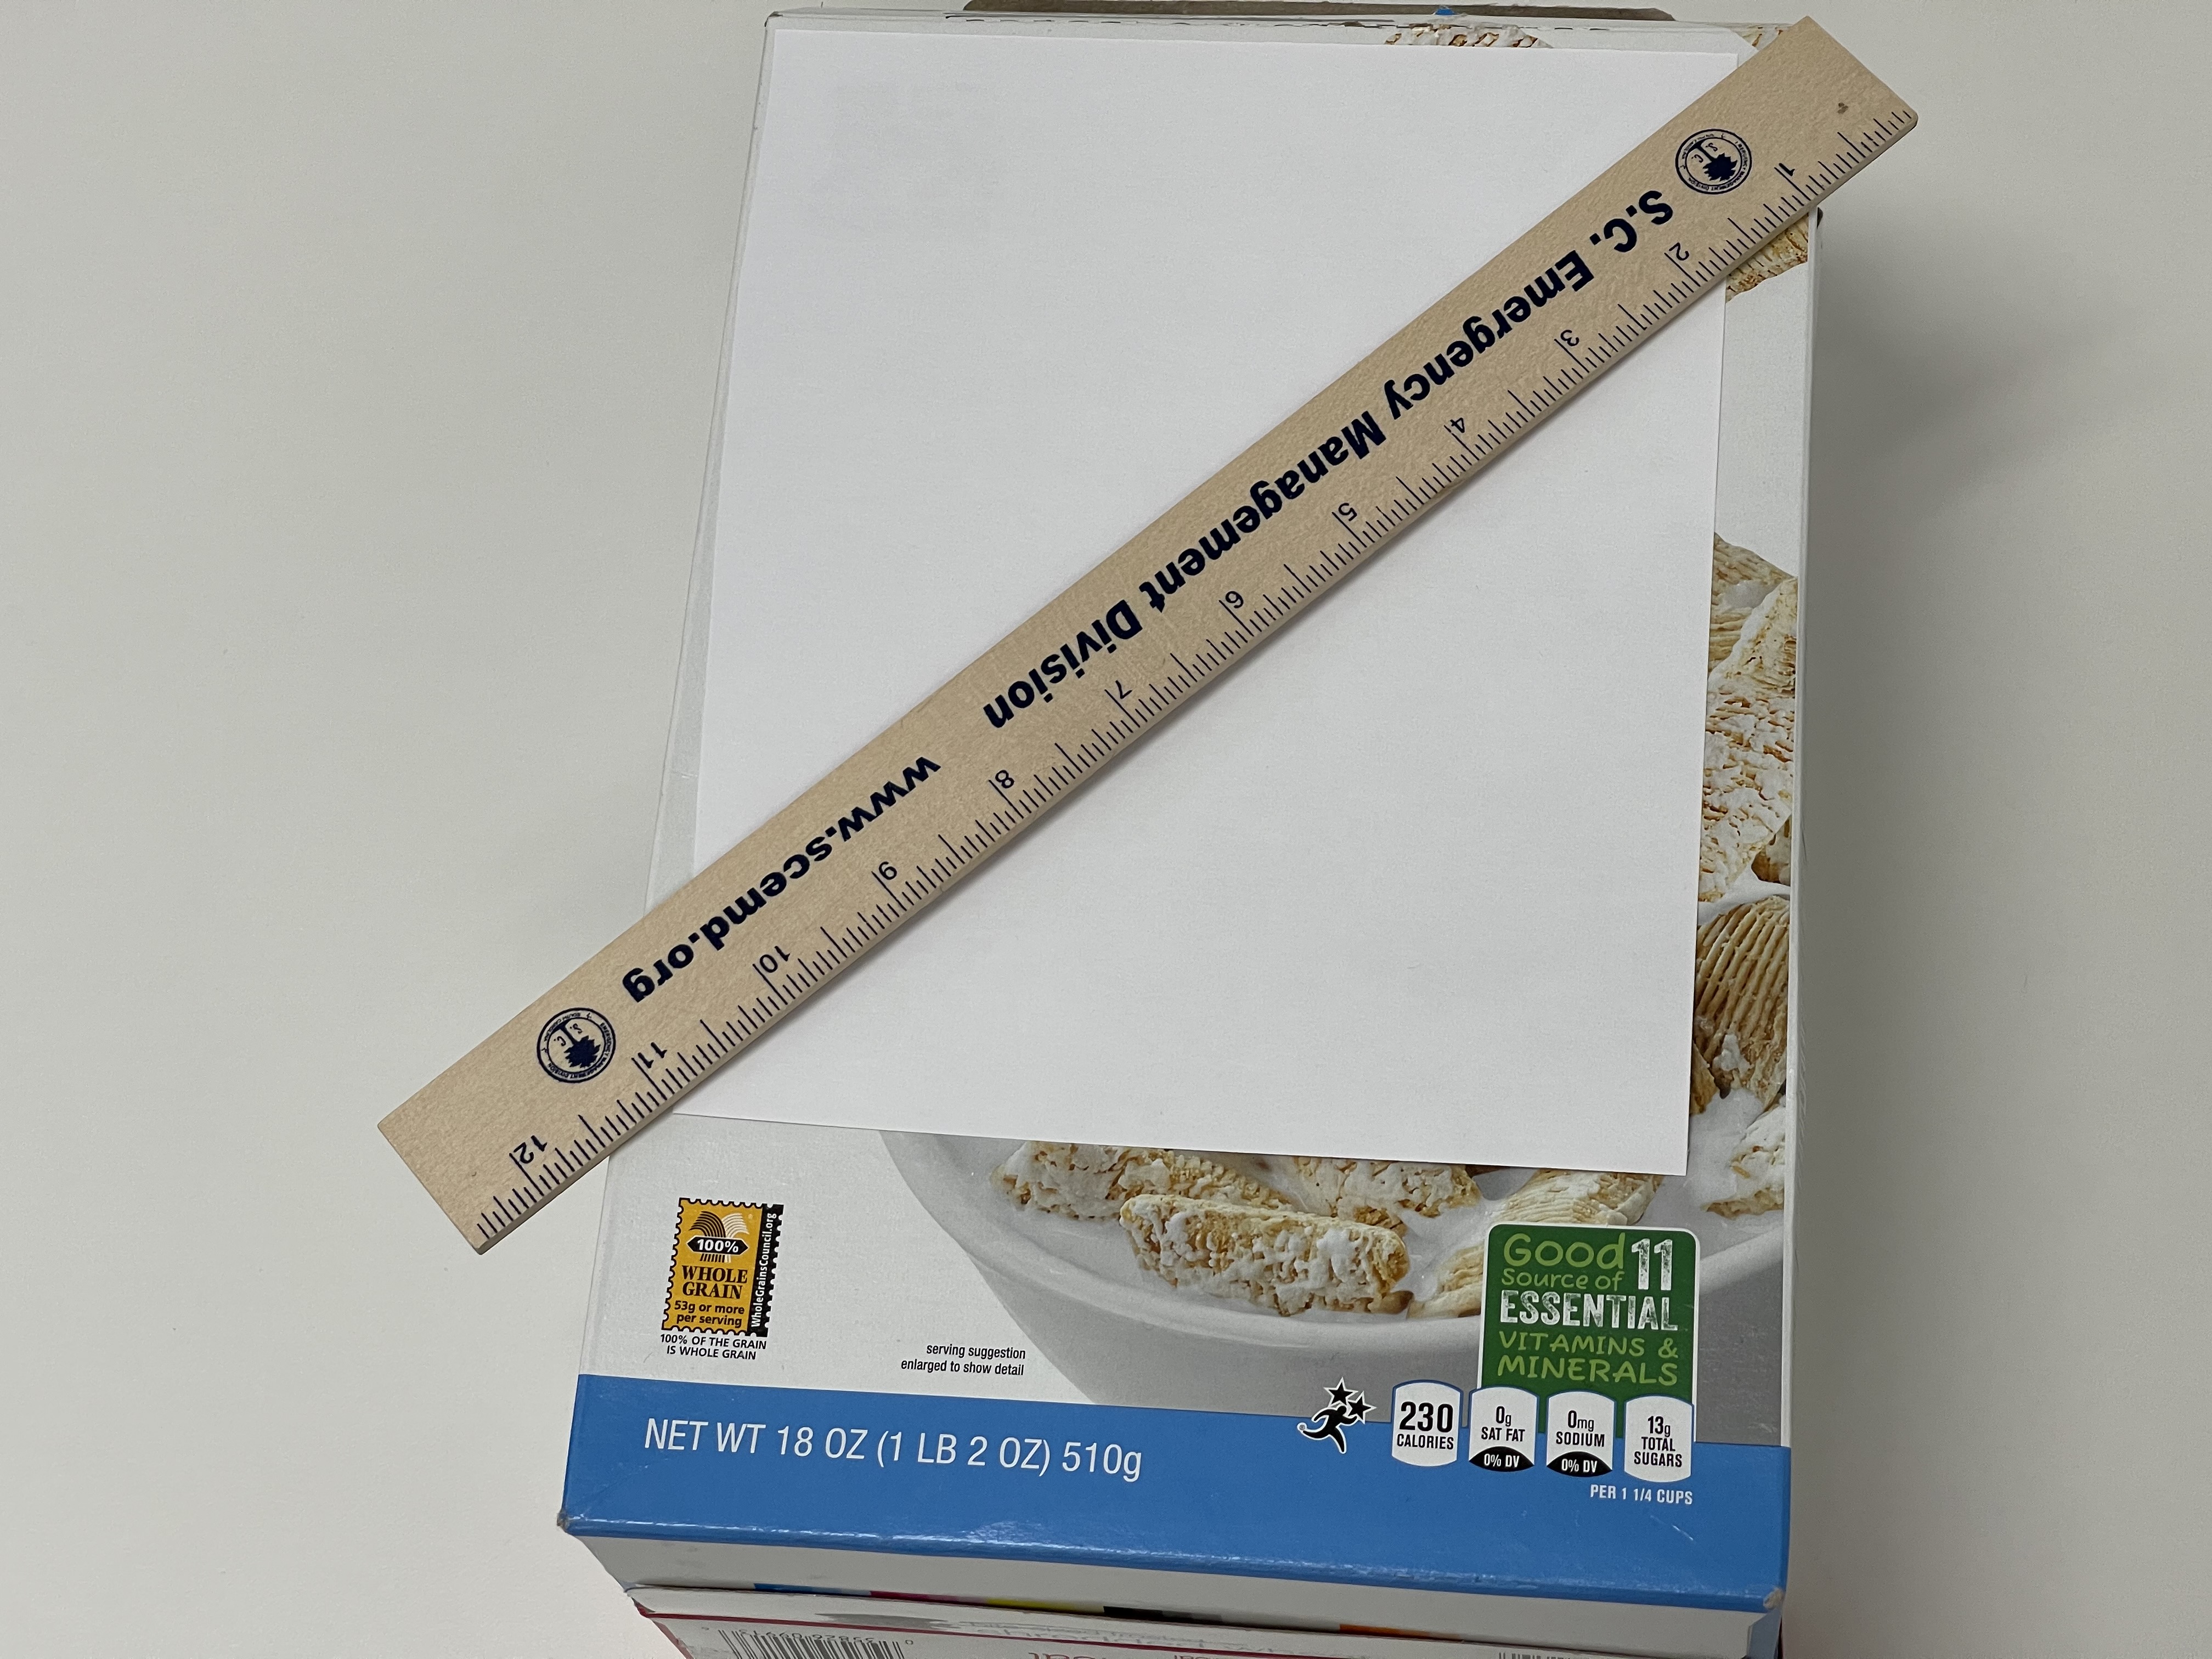 beige ruler lying diagonally on top of white cereal box